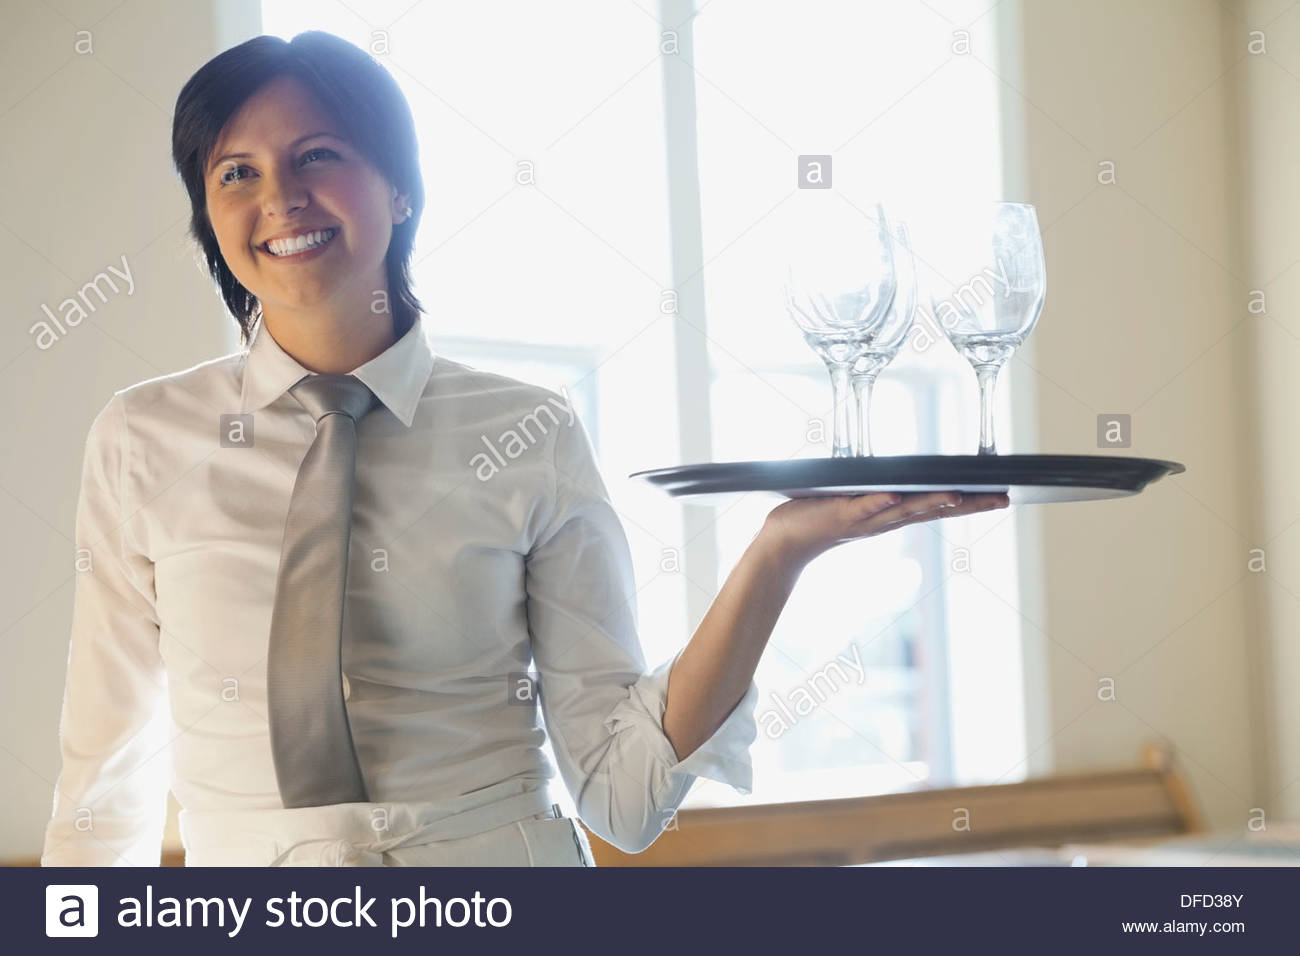 Waitress carrying tray of wine glasses in restaurant Stock Photo